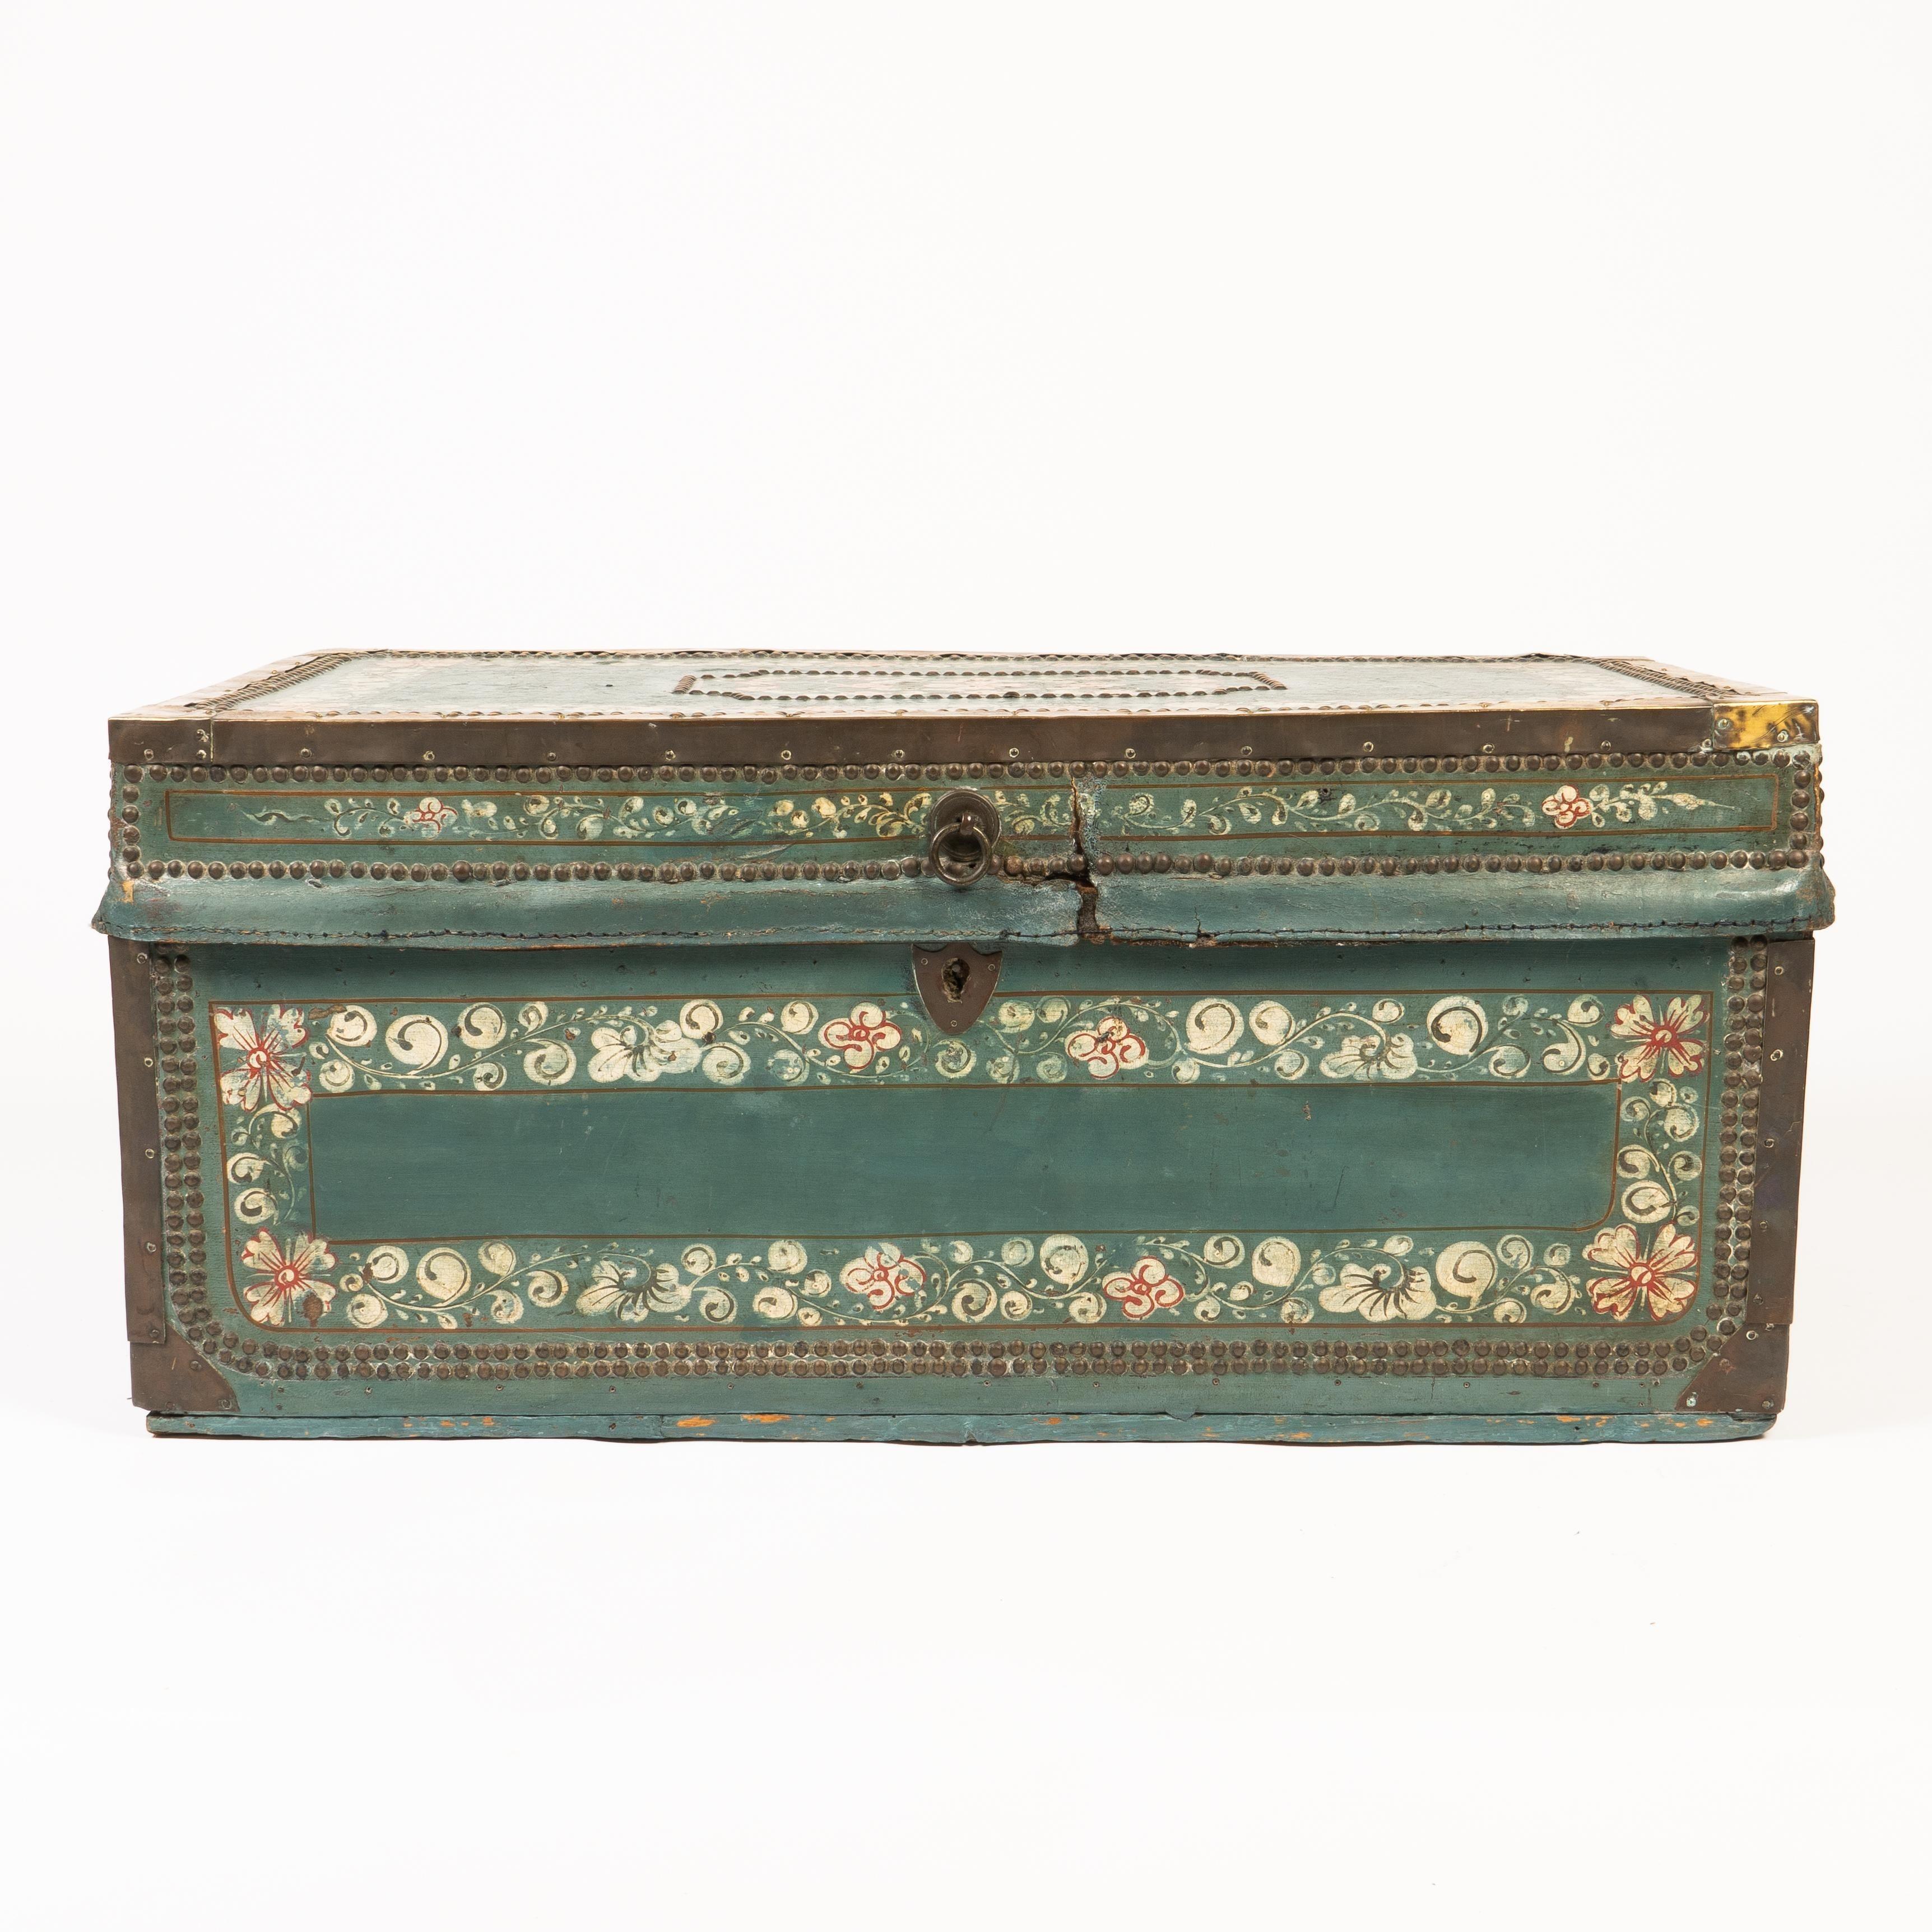 Decorated blue leather covered camphor wood trunk, bound with brass and mounted with cast brass bail handles.

China, made for the Western Trade, circa 1825.